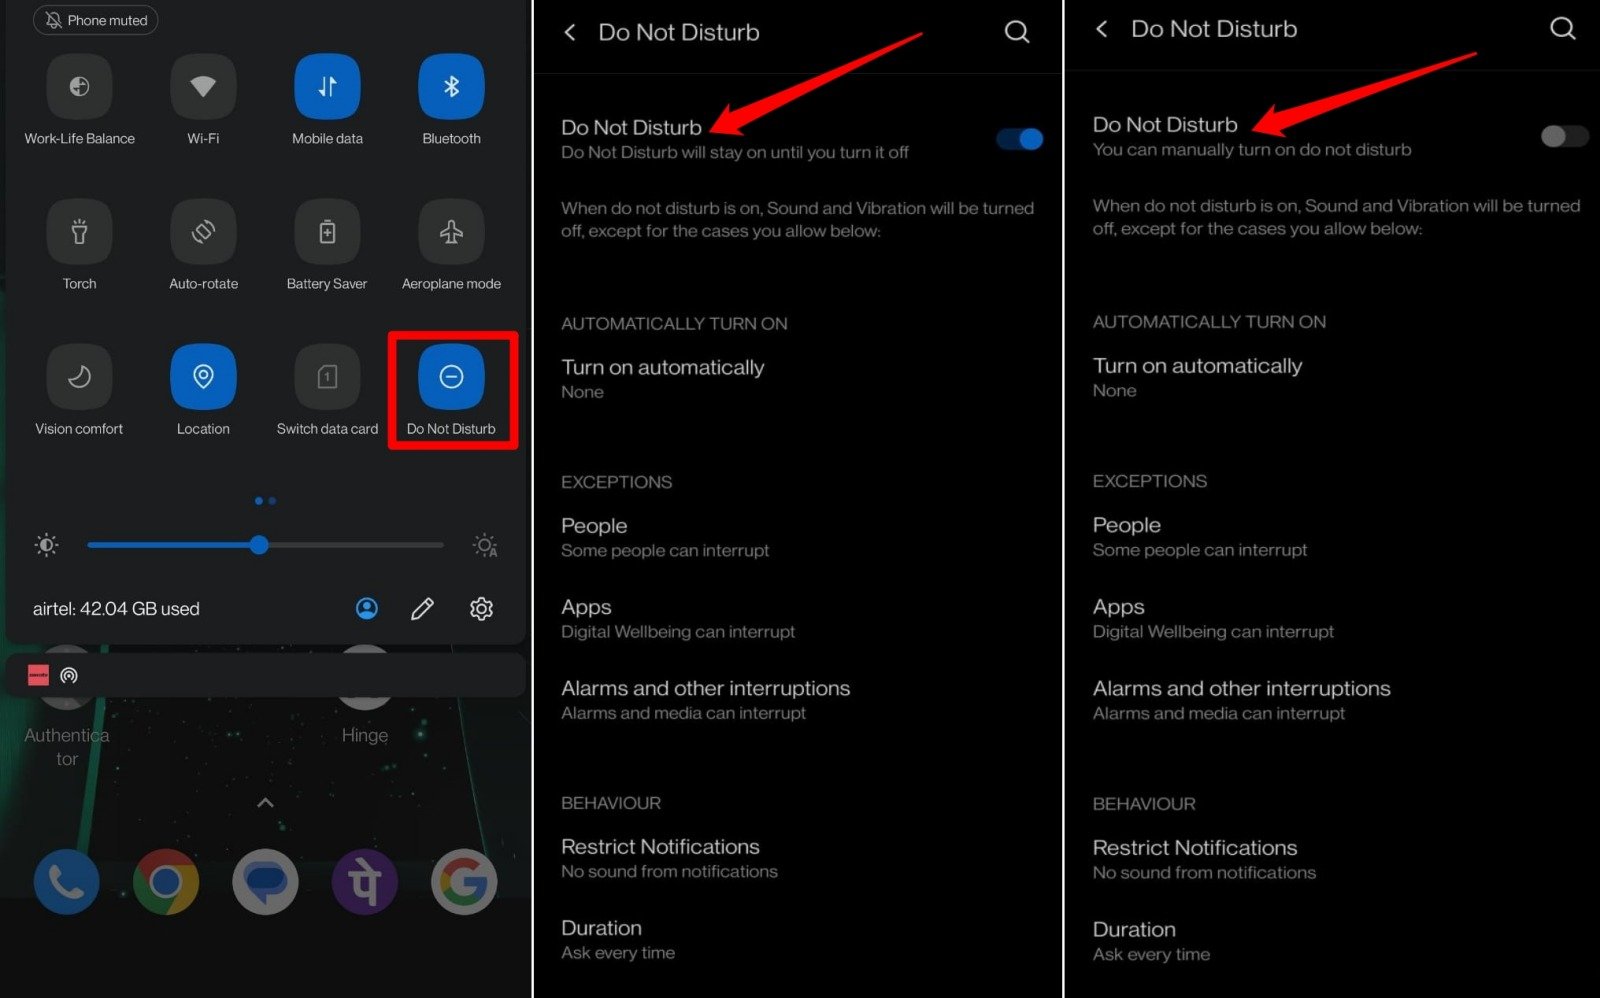 turn off DND on Android phone